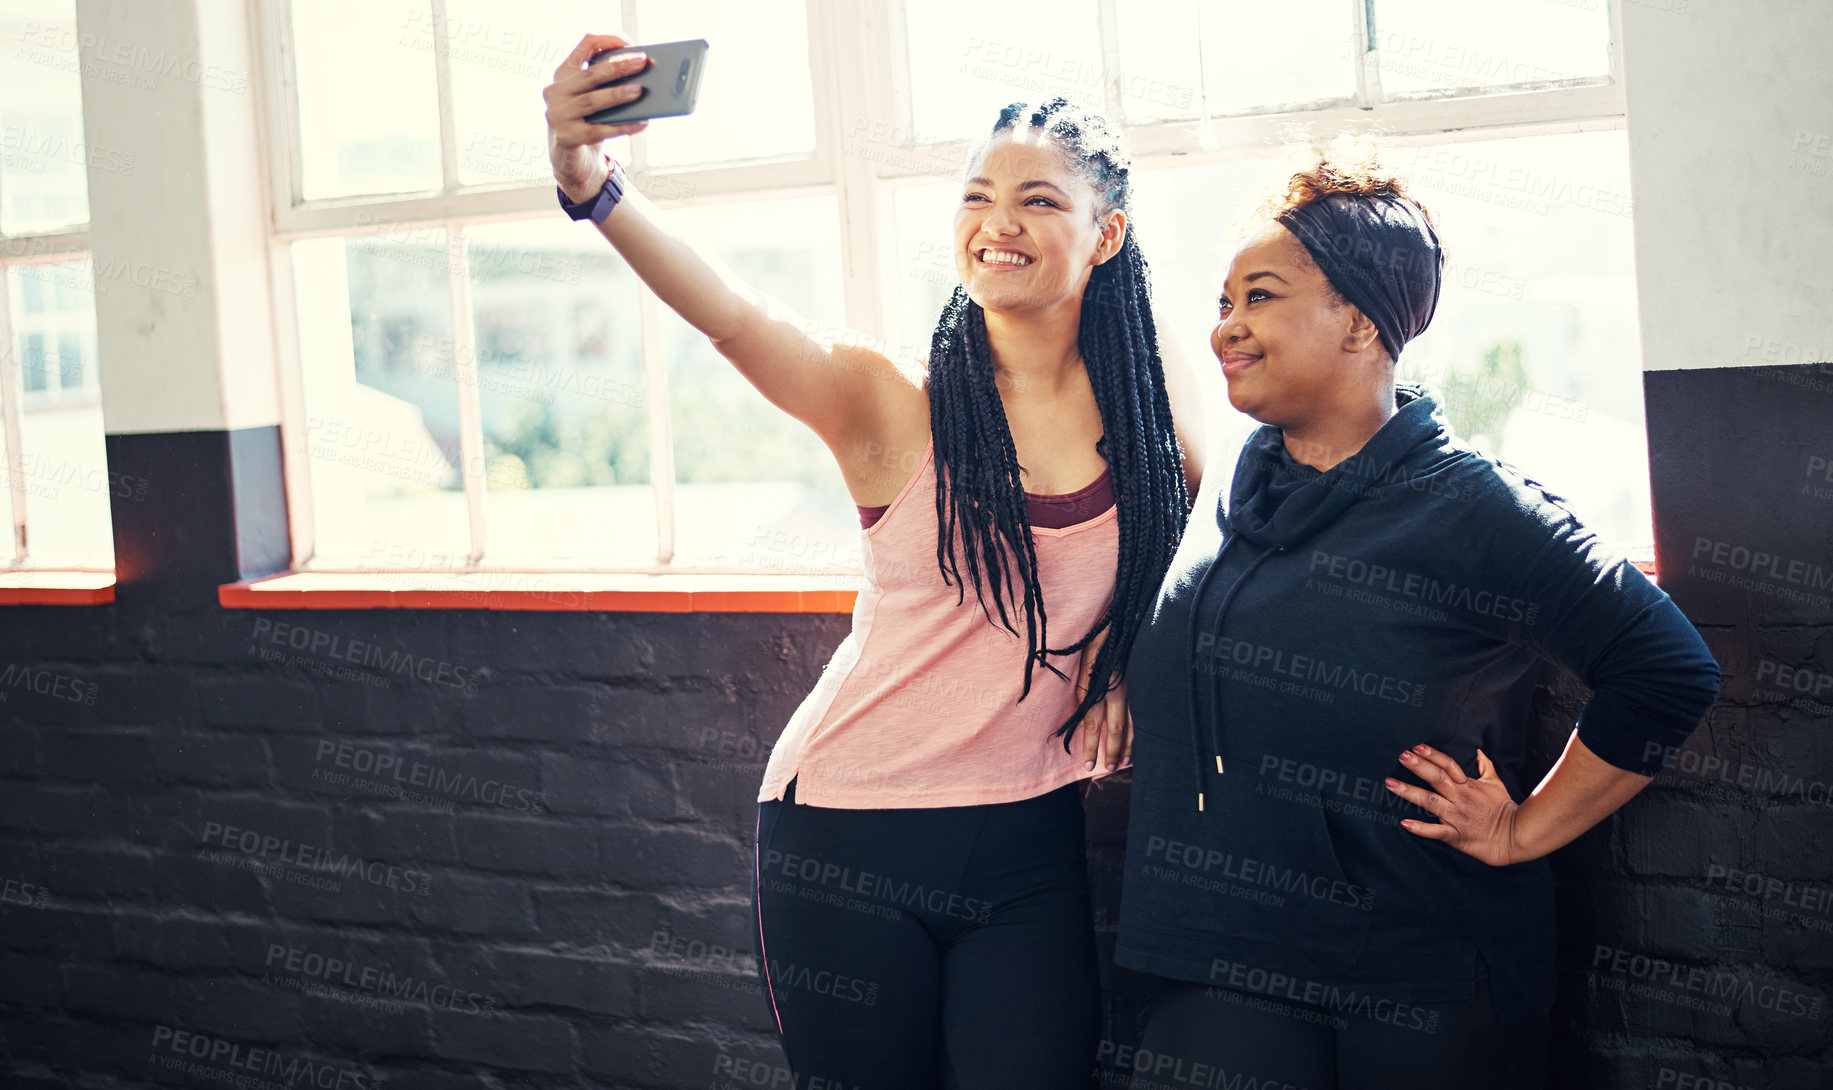 Buy stock photo Shot of two cheerful young women taking a self portrait together before a workout session in a gym